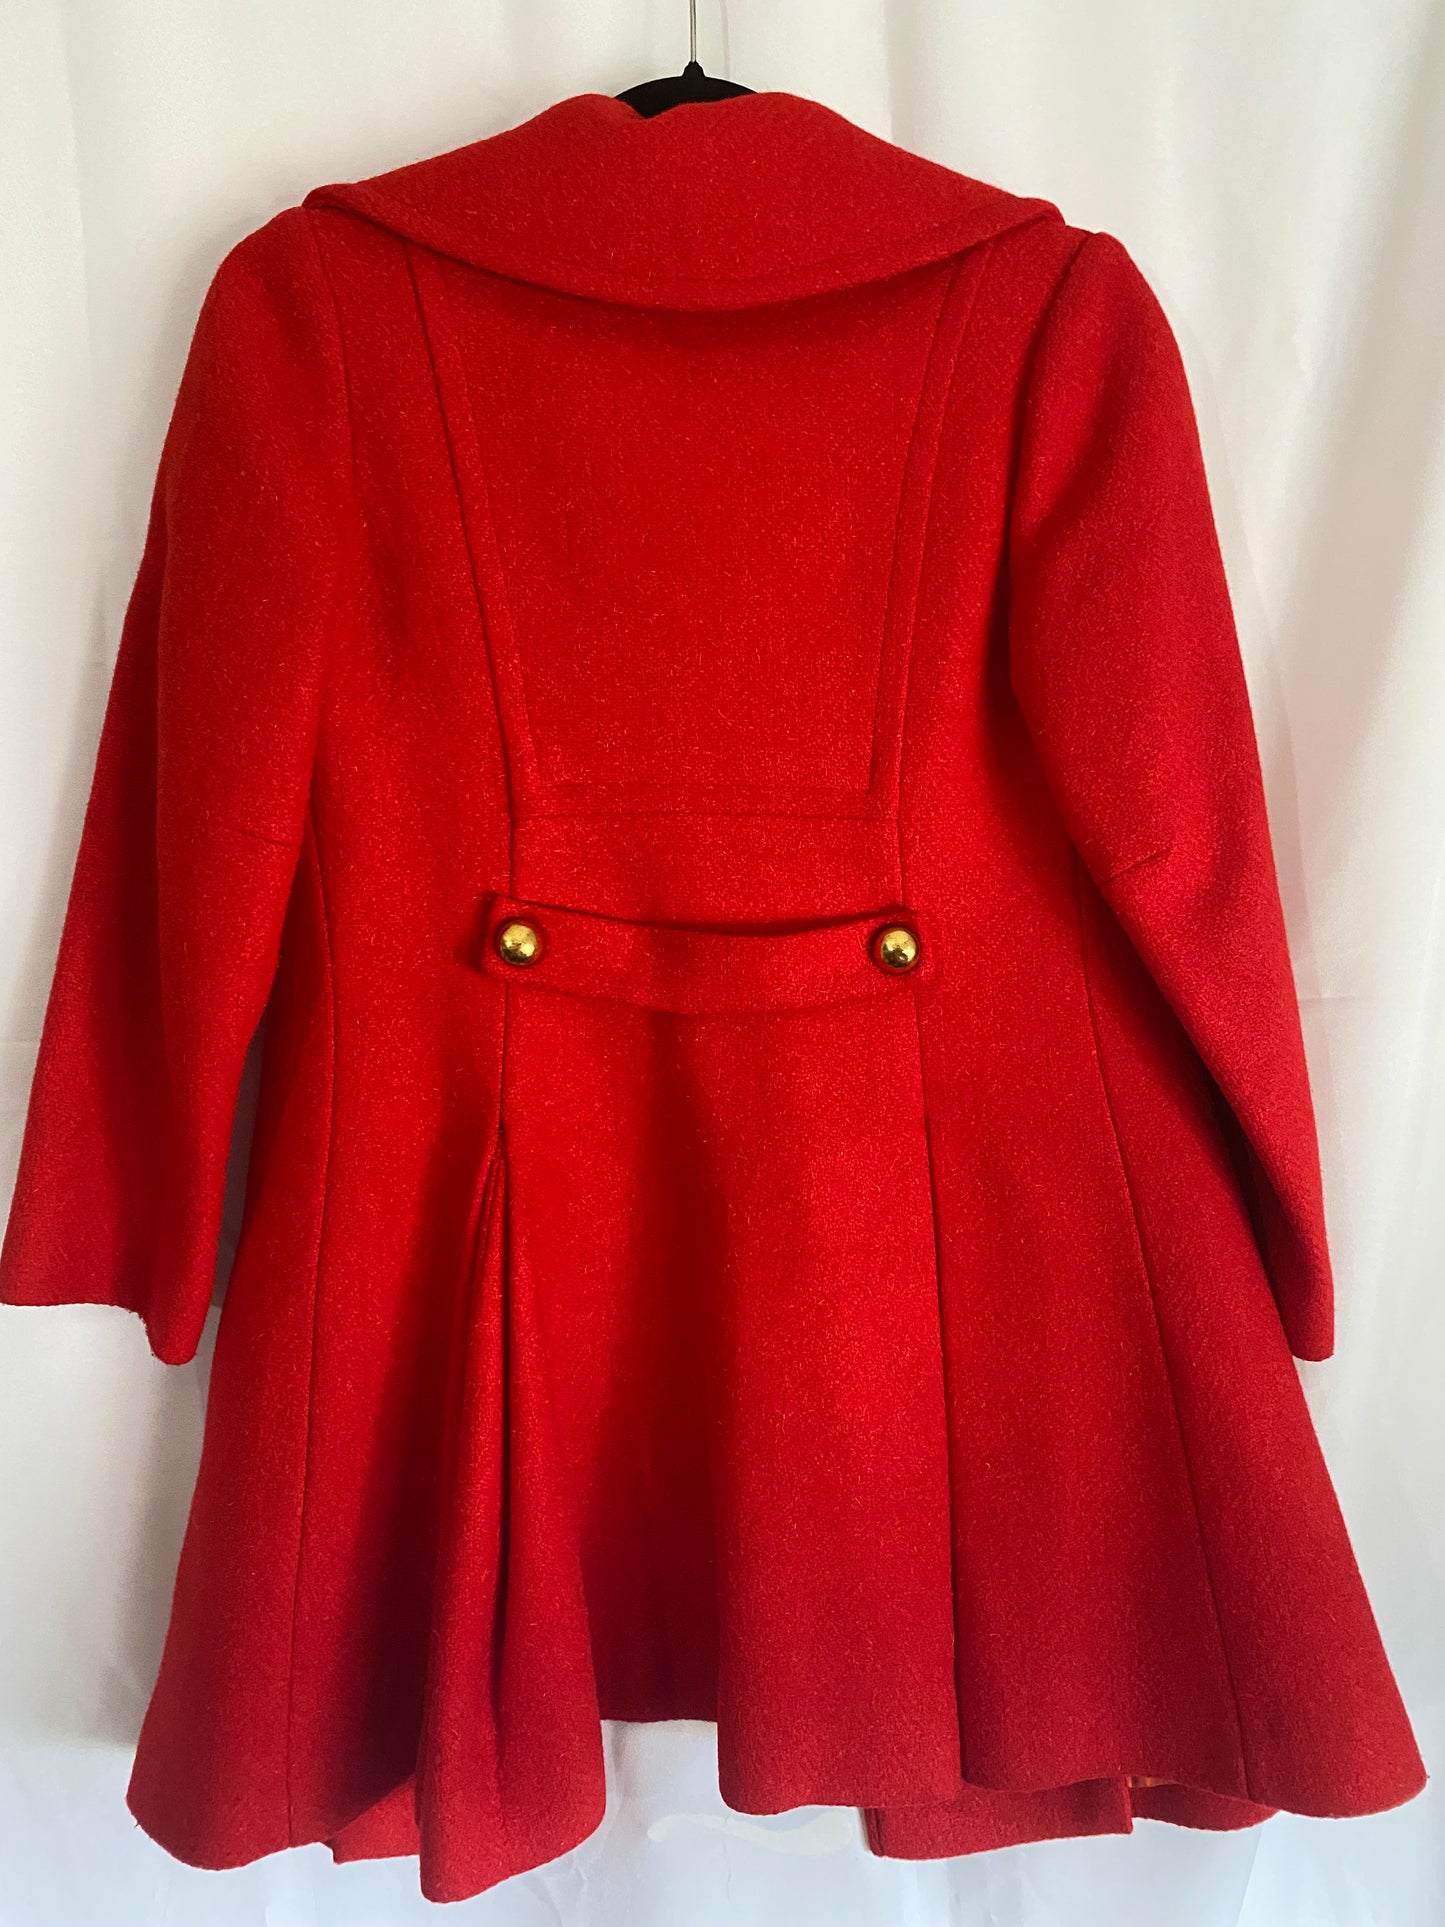 1950's Tomato Red Jacket